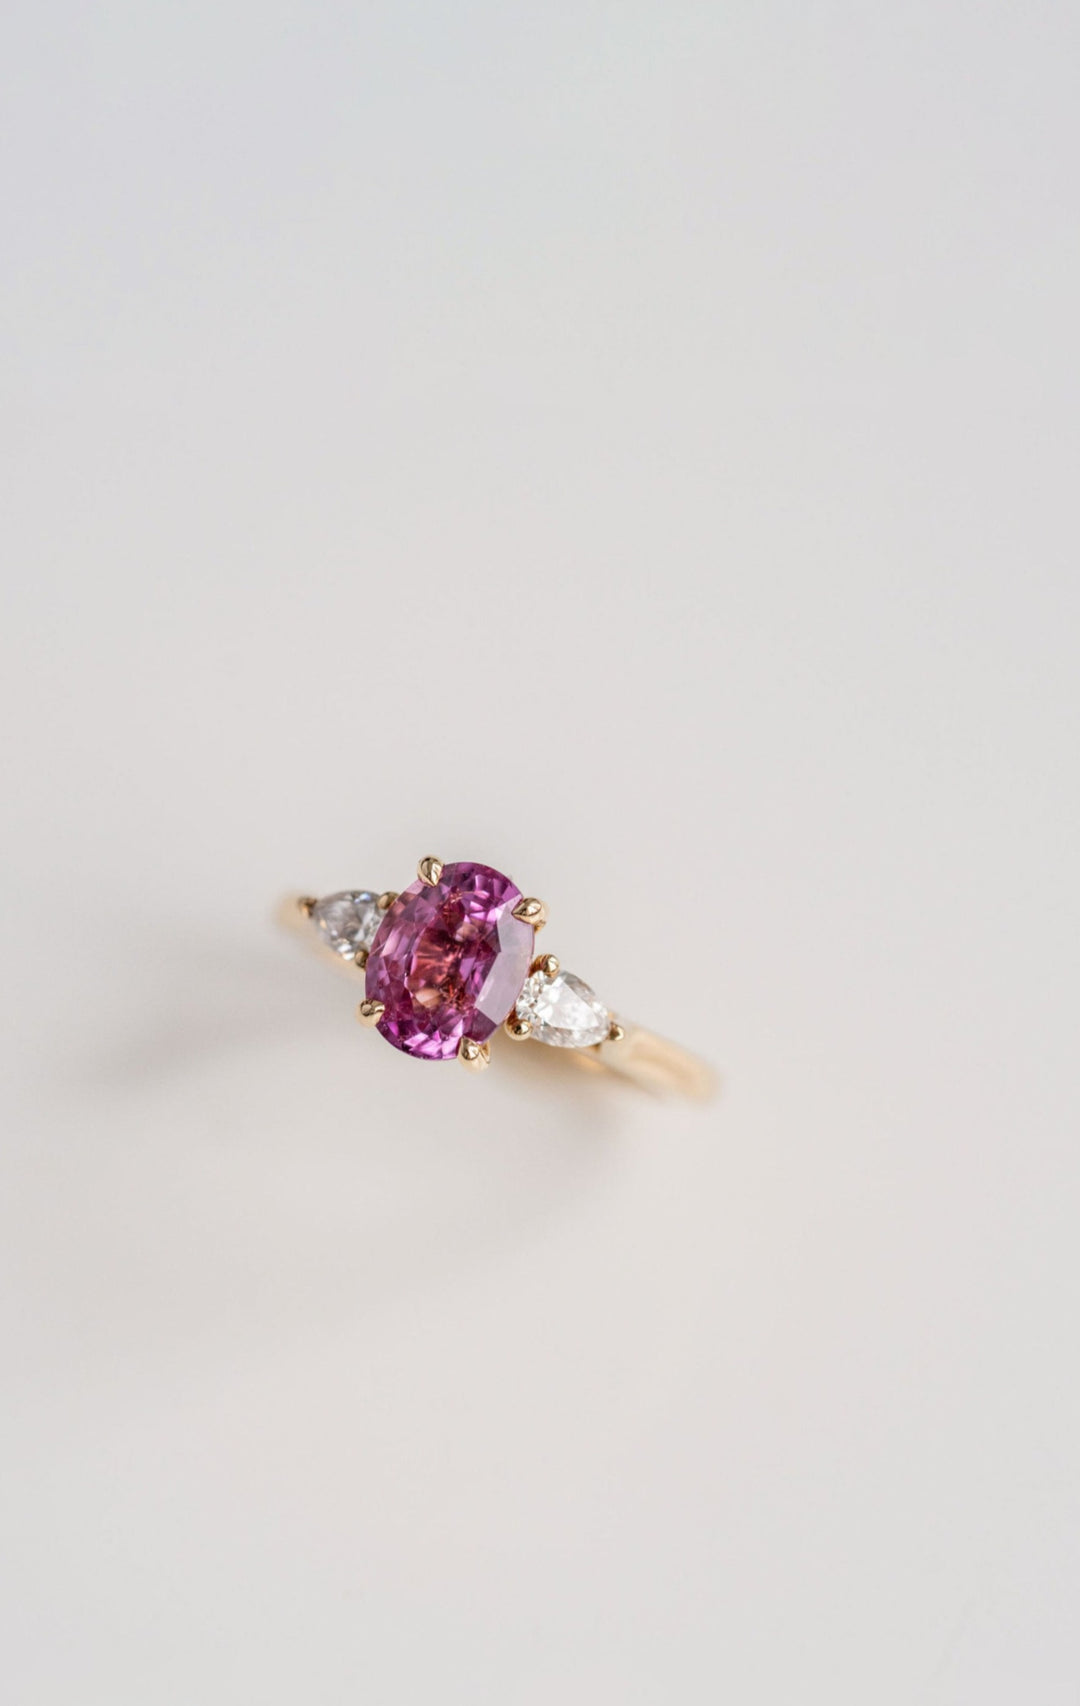 Oval Vivid Pink Sapphire With Pear Shape Diamond Accents